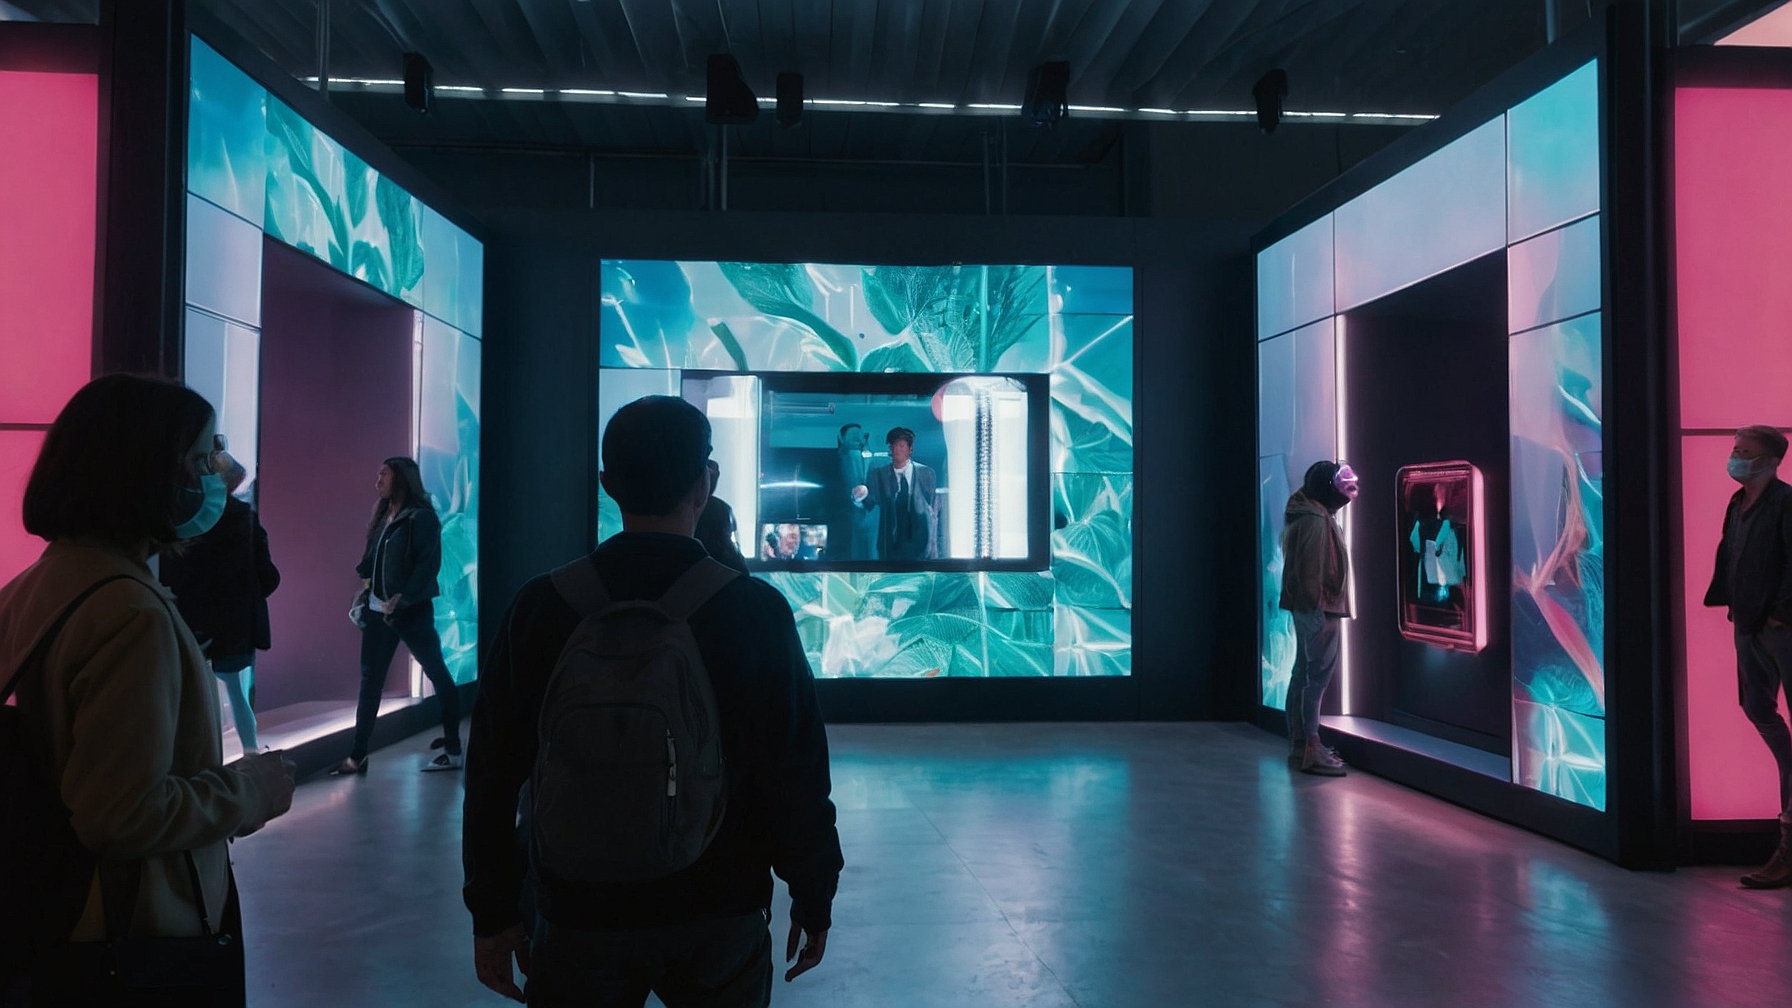 A digital art exhibit set in 2040, with AI-curated fashion NFT collections, visitors browsing in augmented reality and paying with advanced biometric crypto wallets.